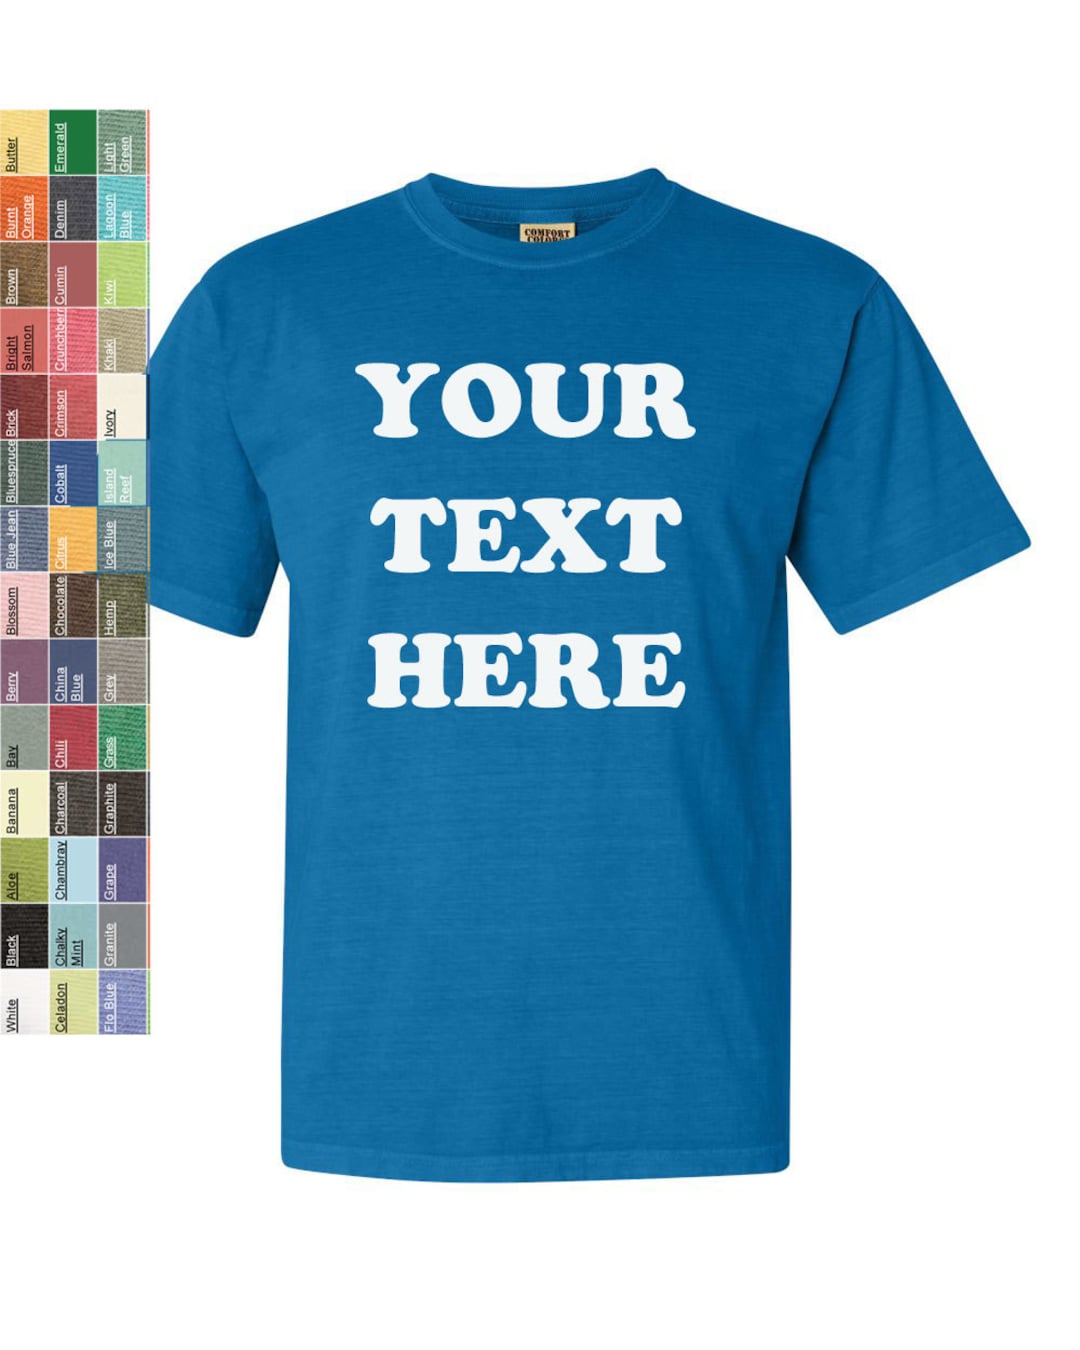 Customize Your Comfort Colors 1717 Tee - 58 Colors Available!